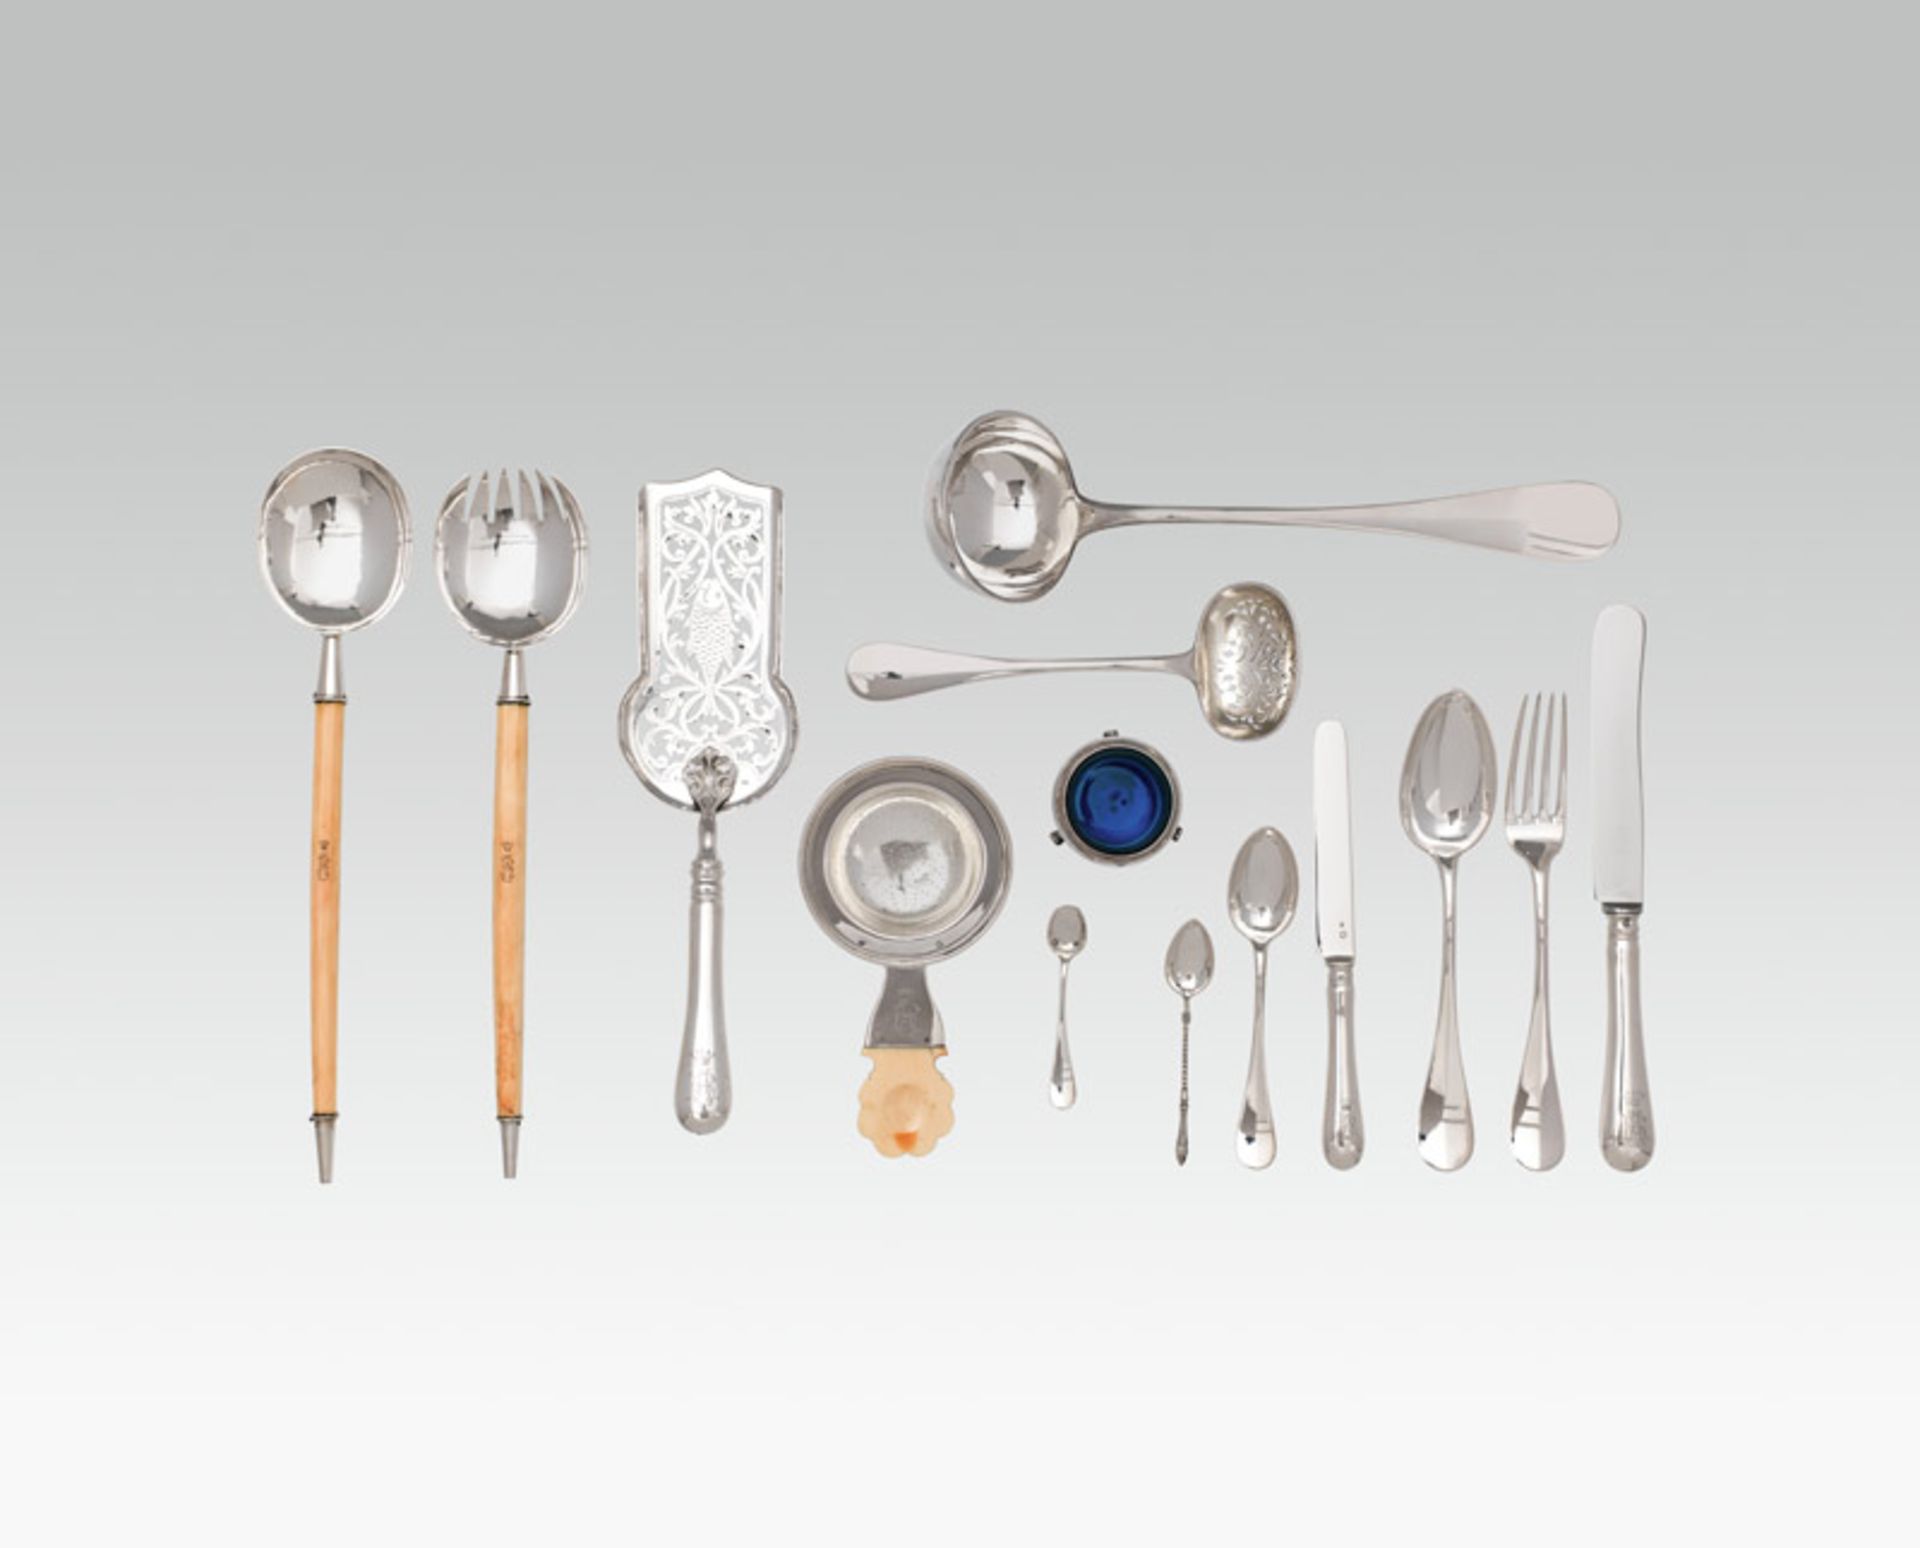 Table cutlery for 12 persons, Austria-Hungary, early 20th century